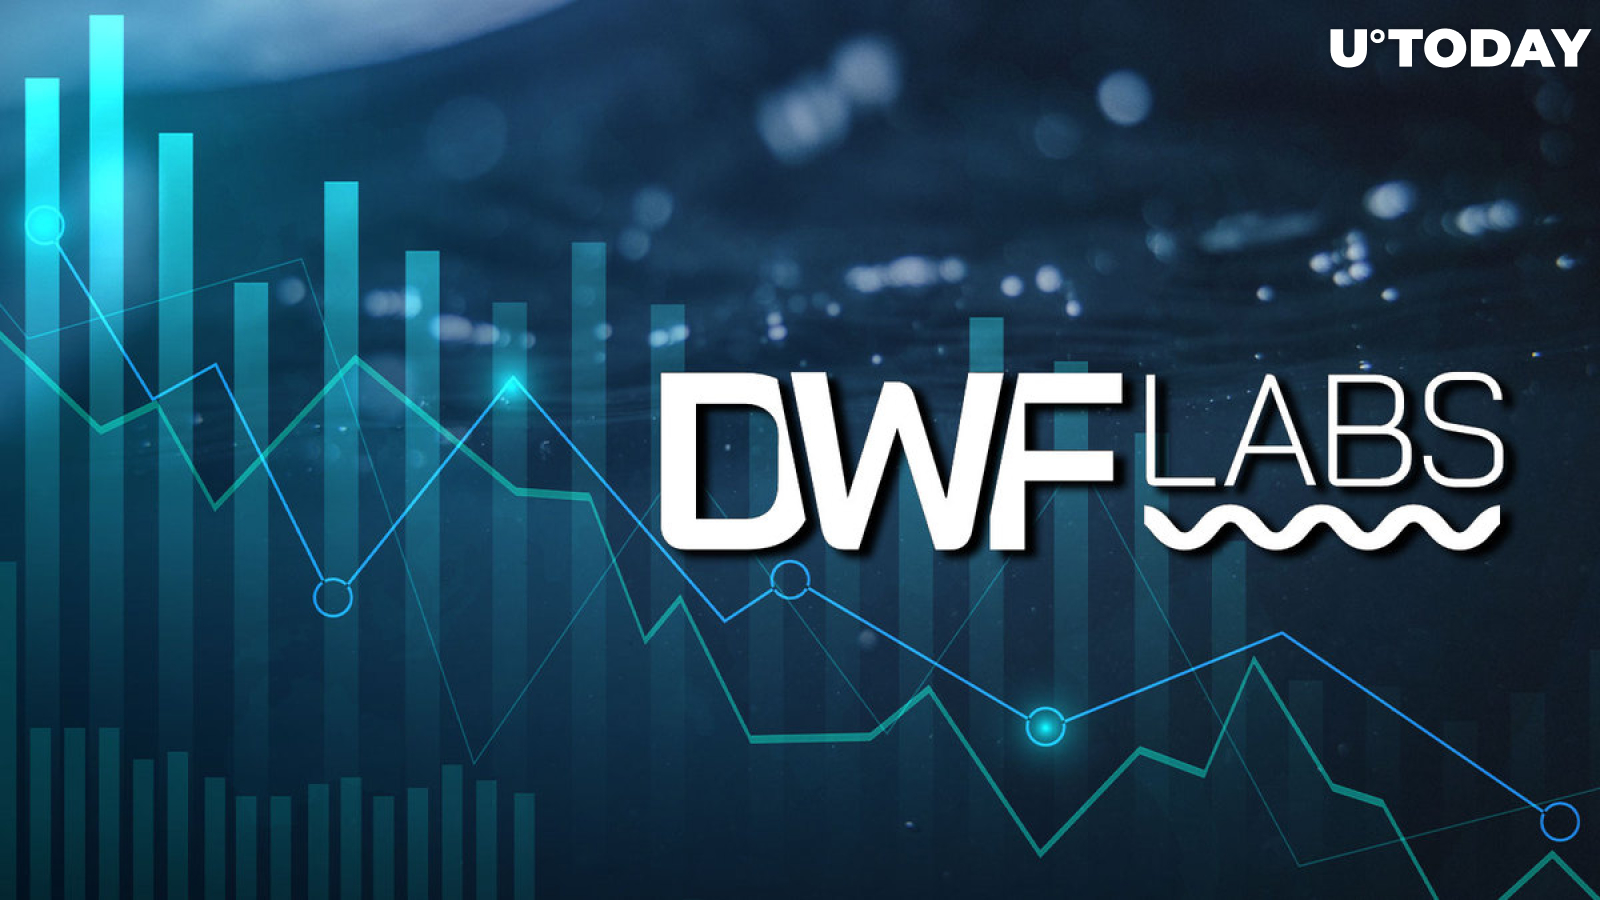 'Bottom in Terms of Activity, Not Prices': DWF Labs' Managing Partner on Ongoing Recession